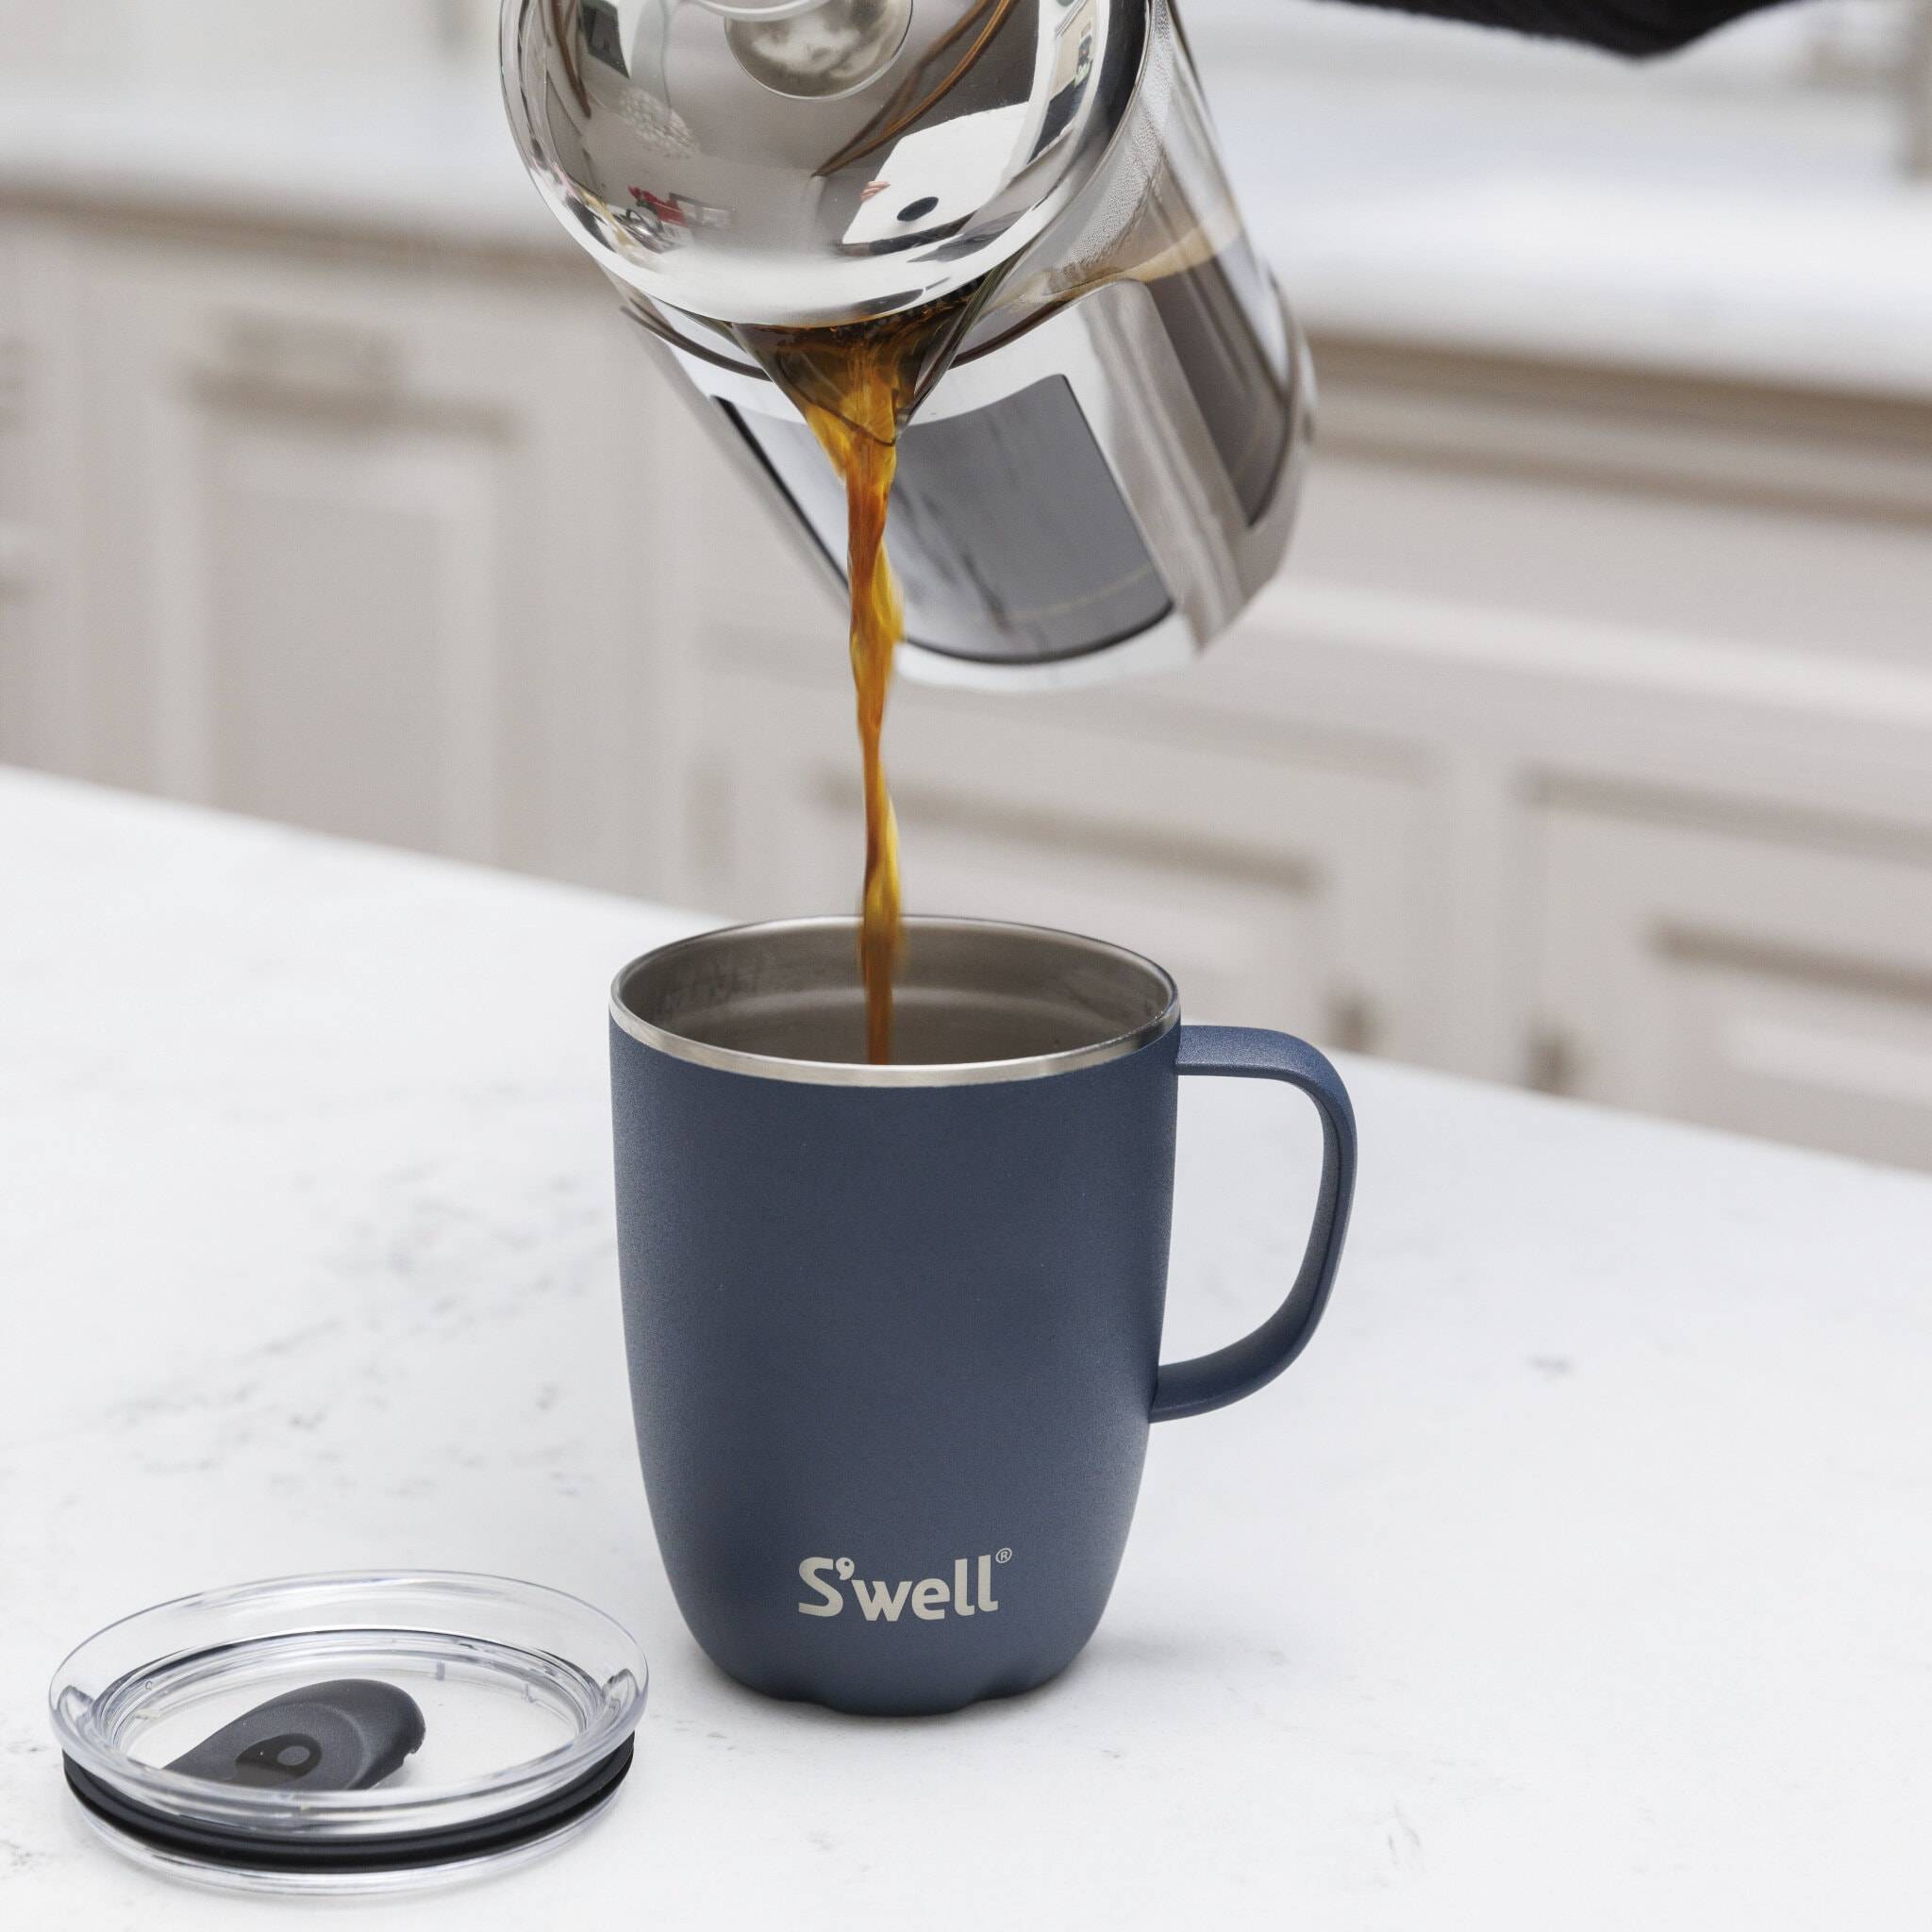 A travel mug with tea being poured into it.